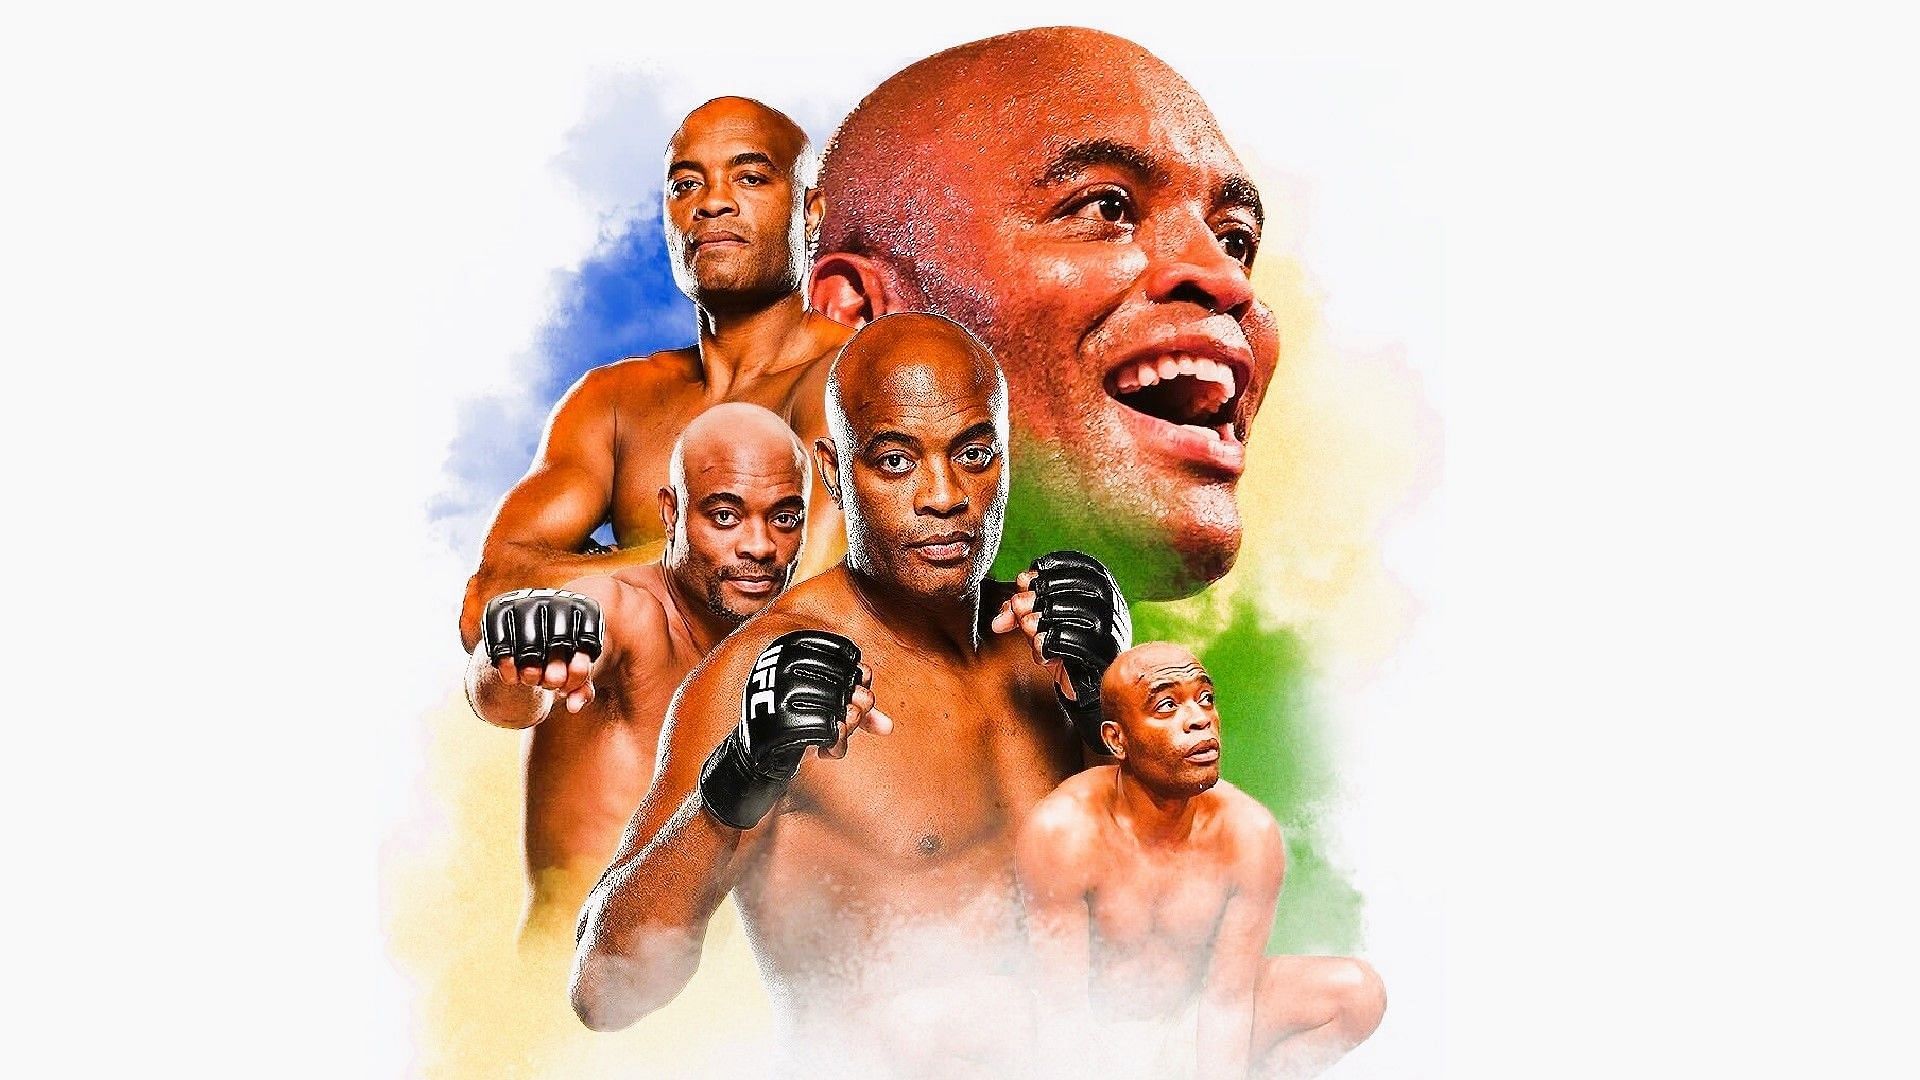 Anderson Silva Kicks Off Championship Reign With Stunning Knockout Win